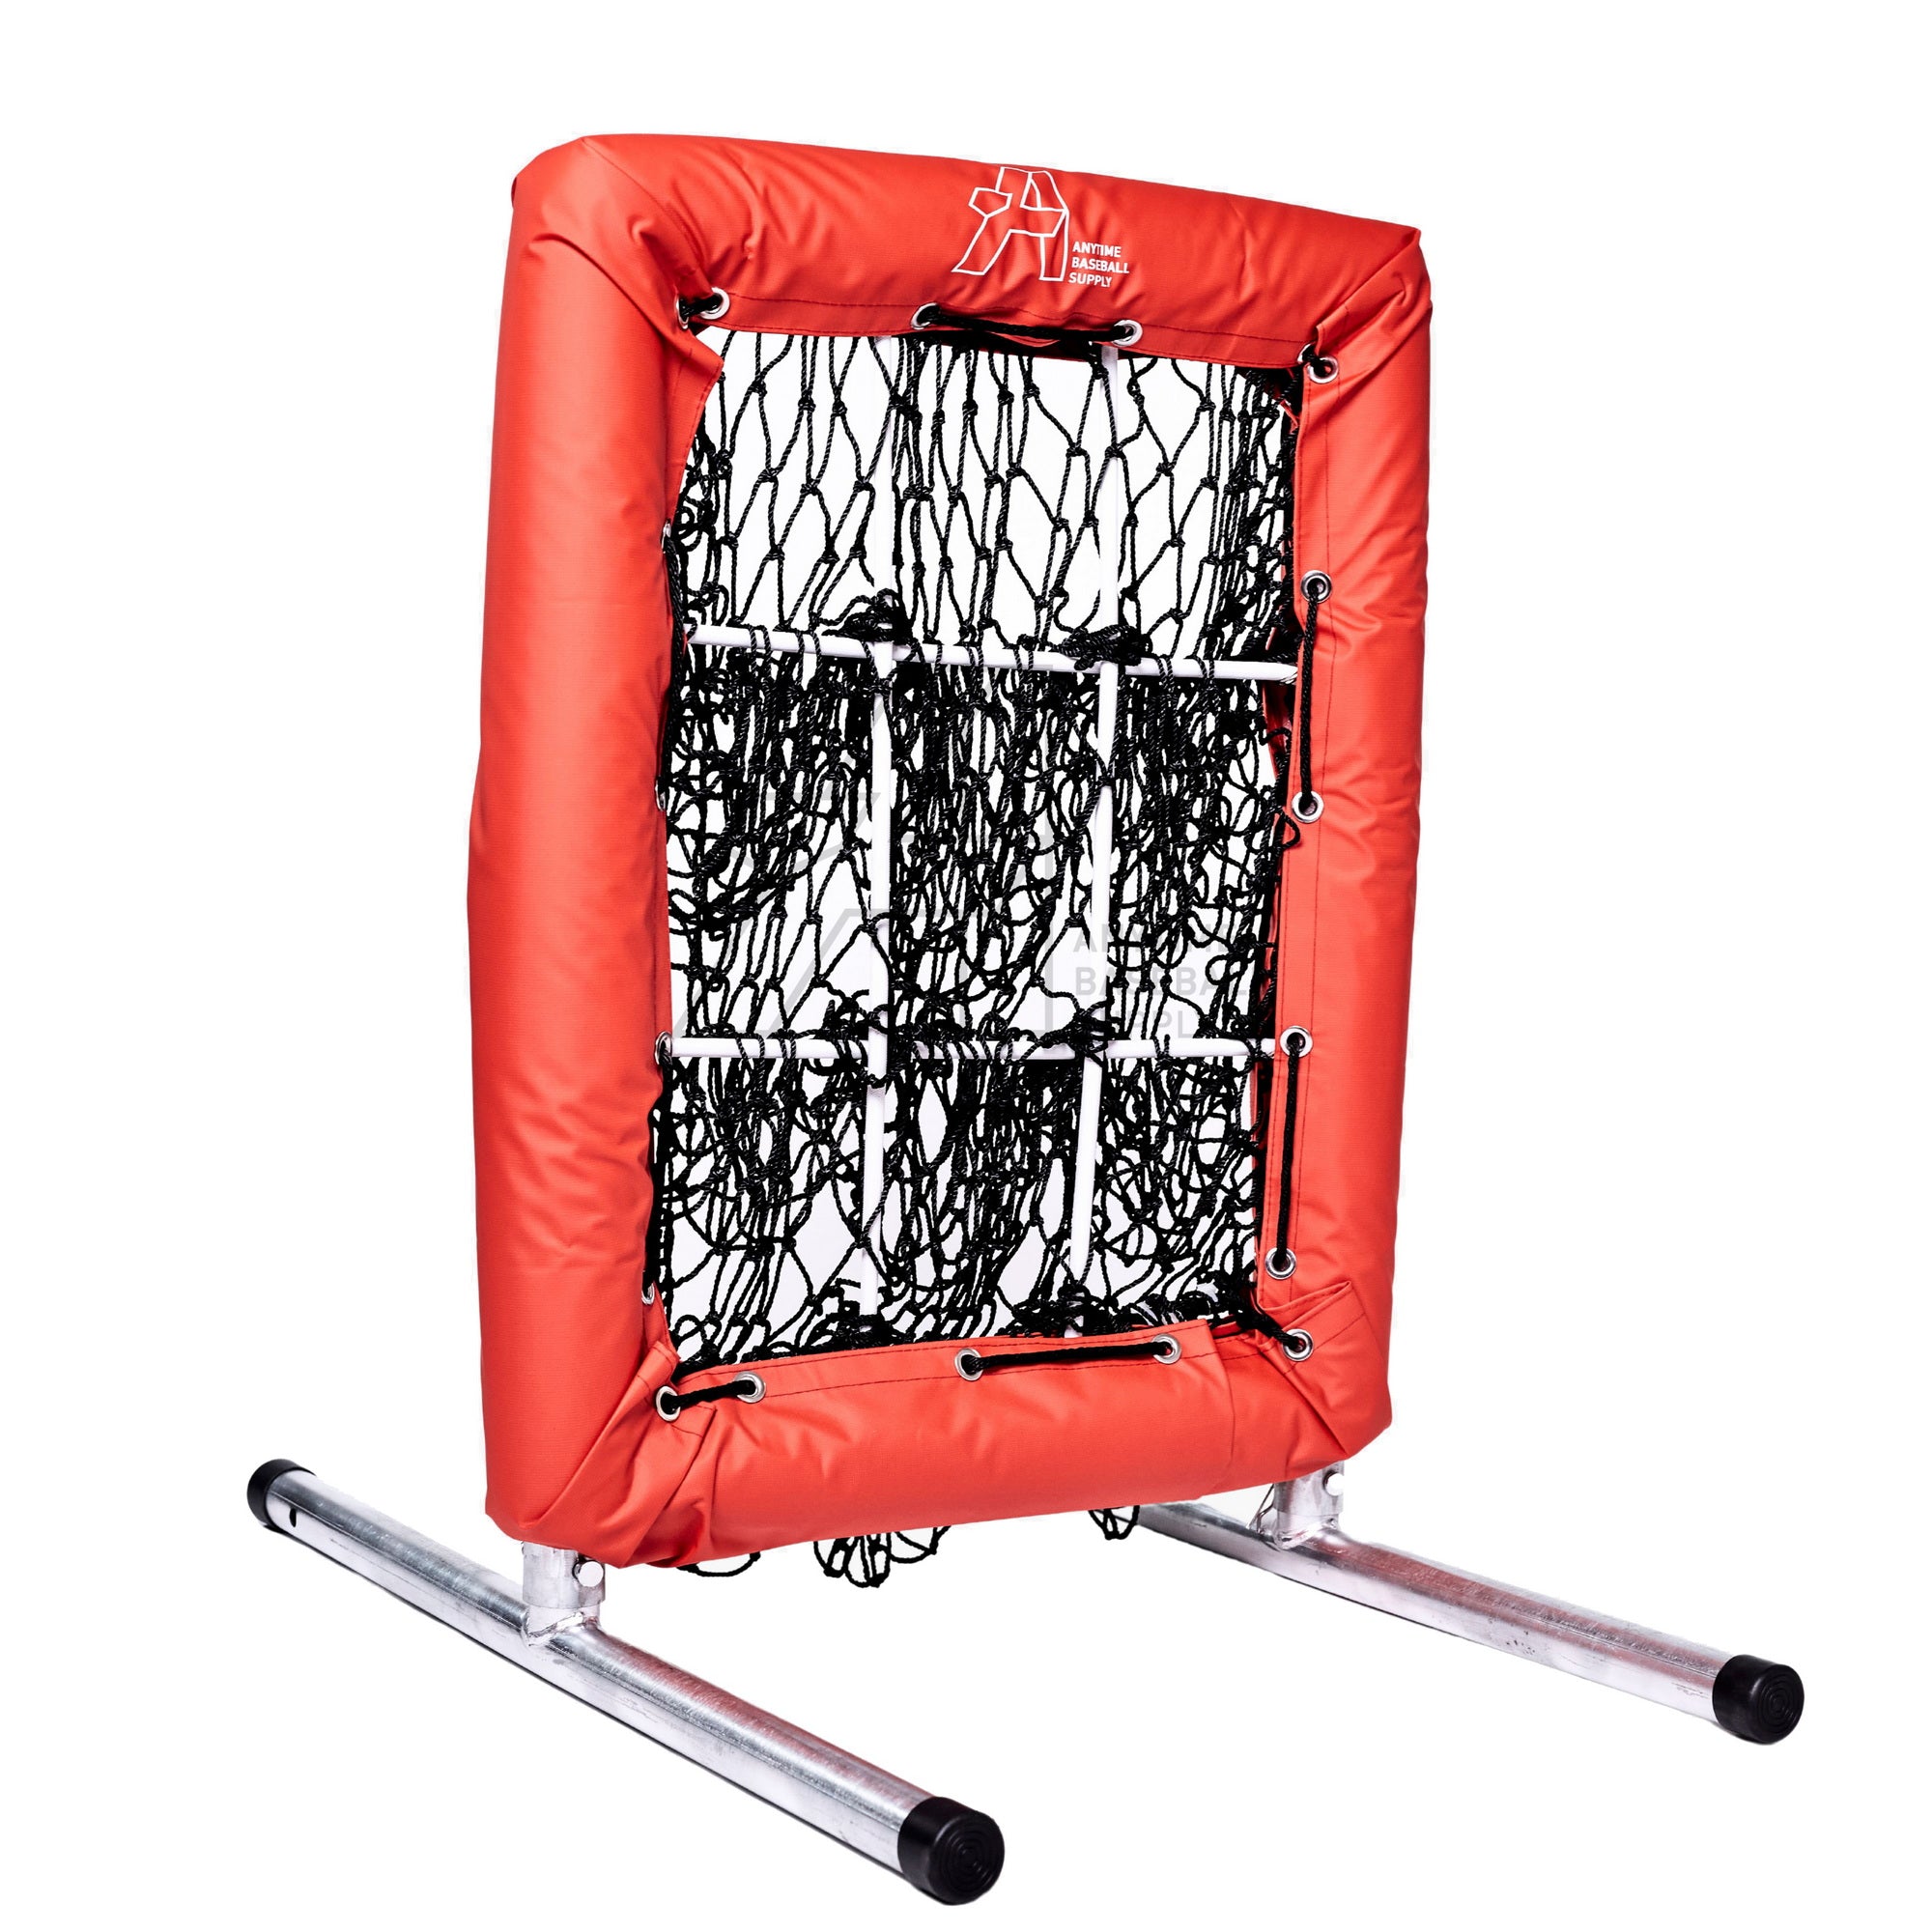 No Hitter Net 9 Hole Pitching Net Red Angled View